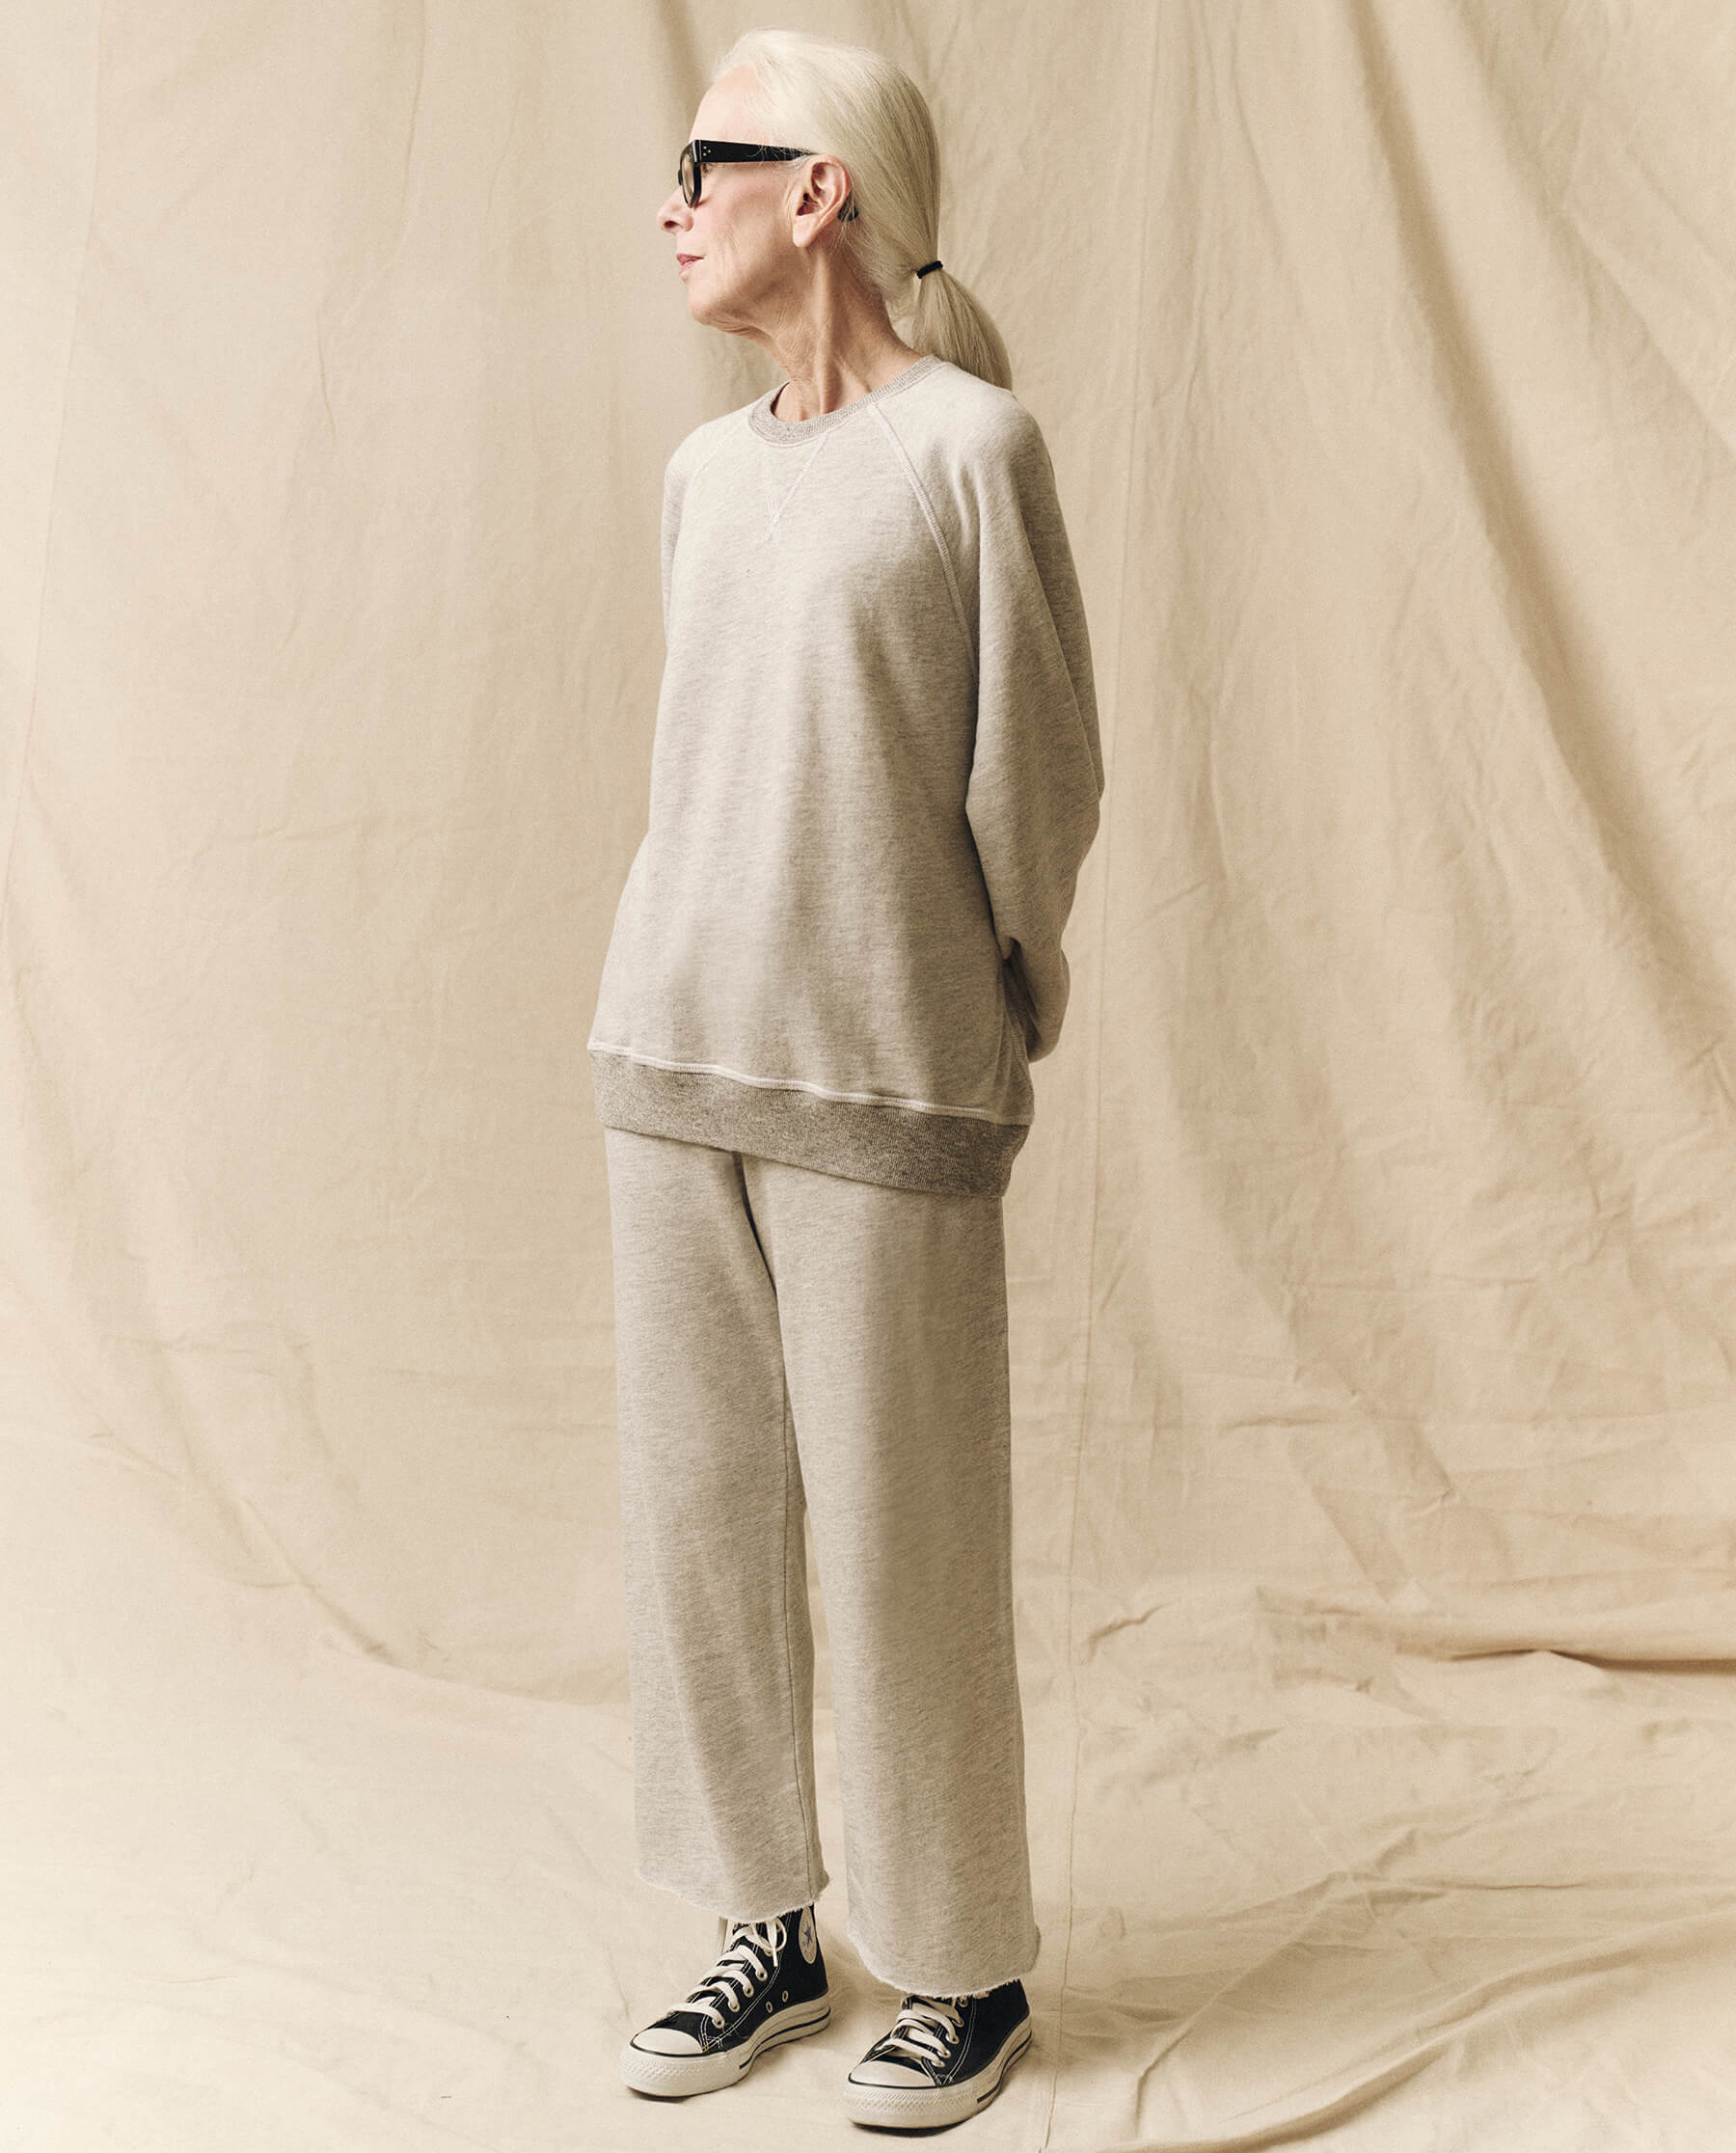 The Slouch Sweatshirt. Solid -- Soft Heather Grey SWEATSHIRTS THE GREAT. FALL 23 SOFT HEATHER GREY